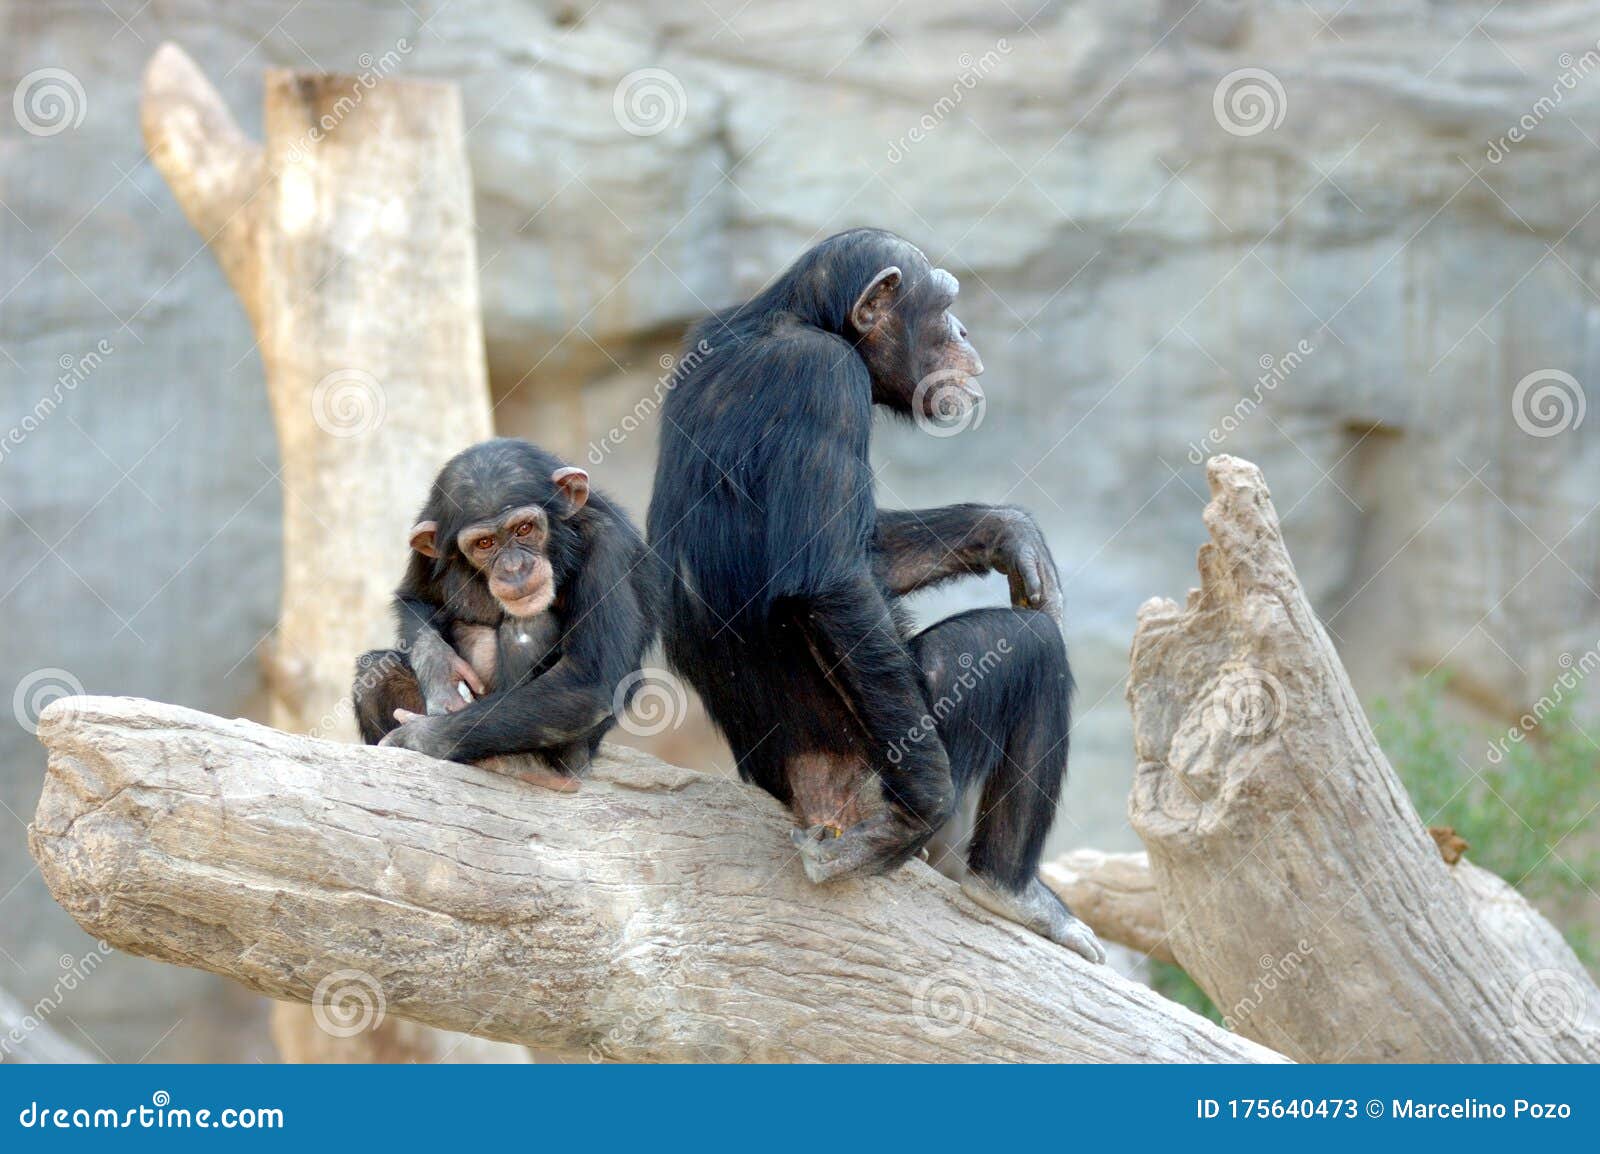 chimpance adult female sitting on trunk with her baby